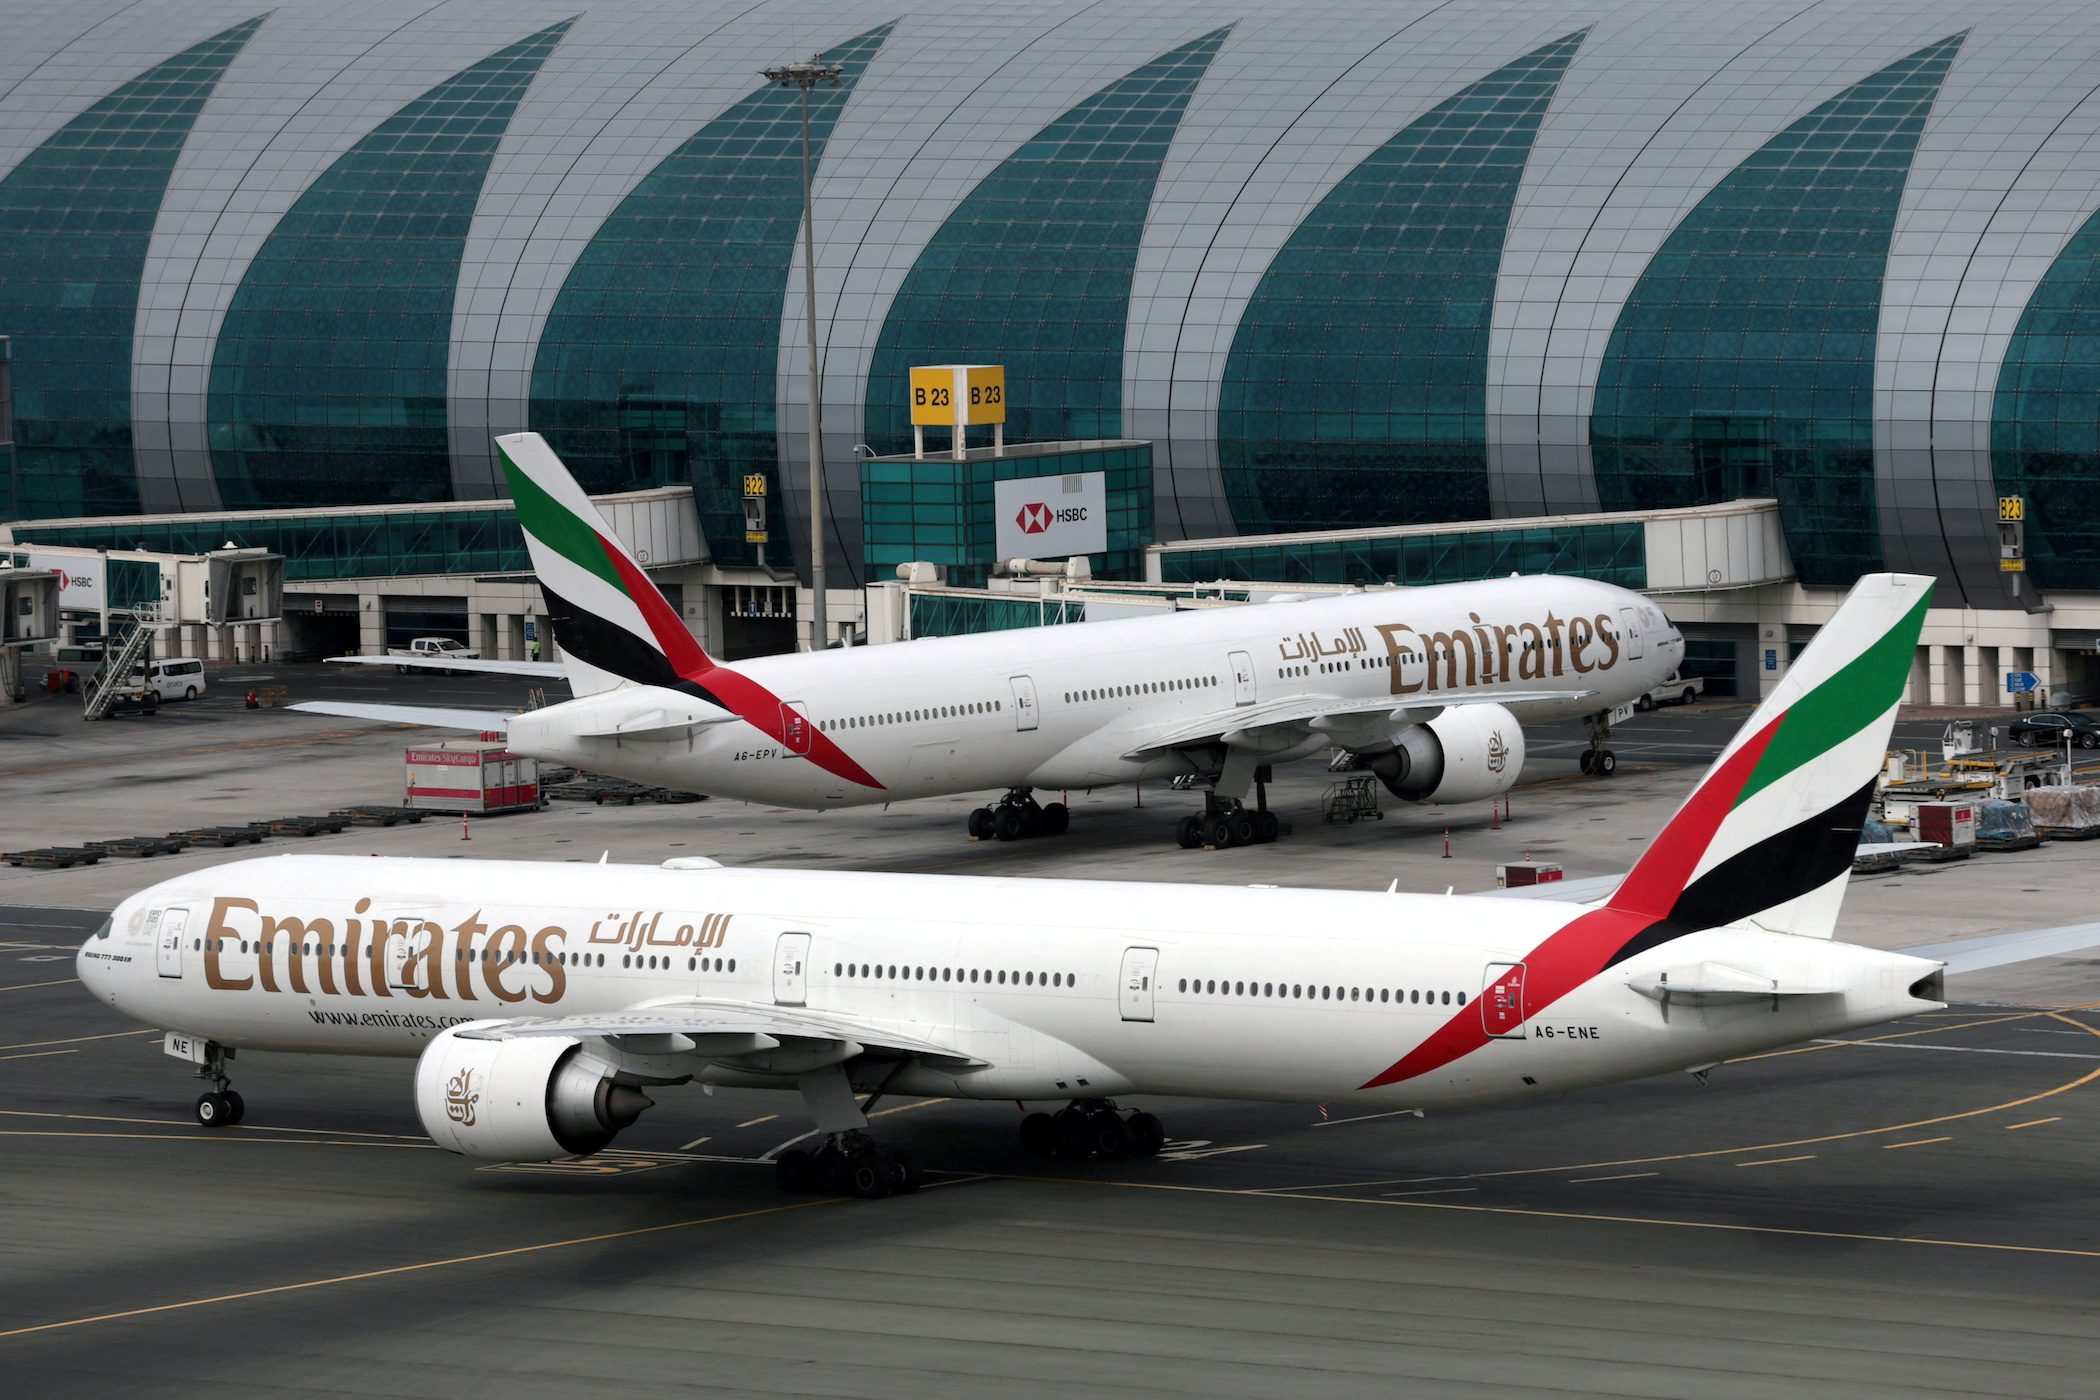 In face-off with London Heathrow, Emirates airline says it won’t cut capacity